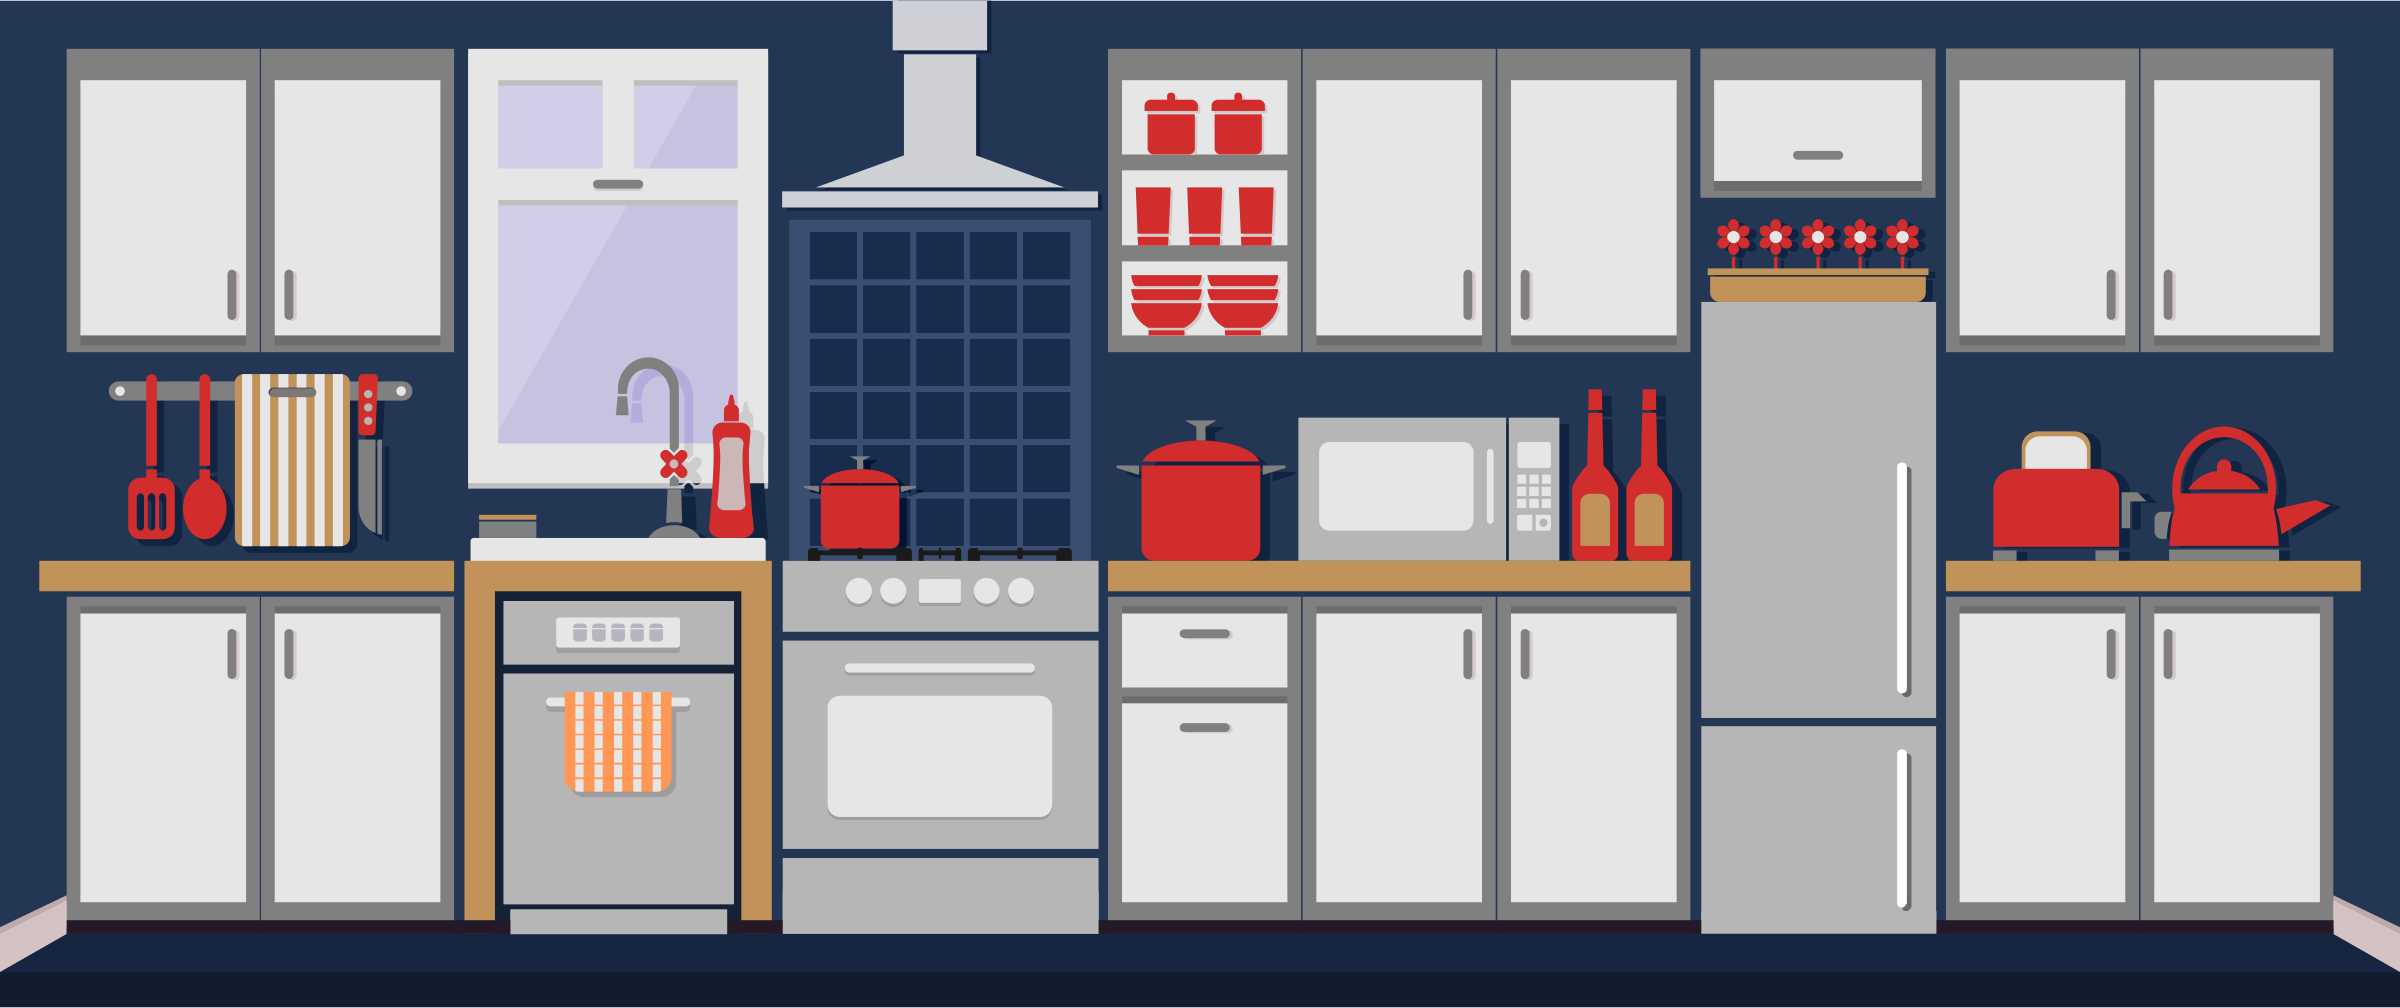 Simple Kitchen Remixed With Flat Colors And Shadows By Barrettward